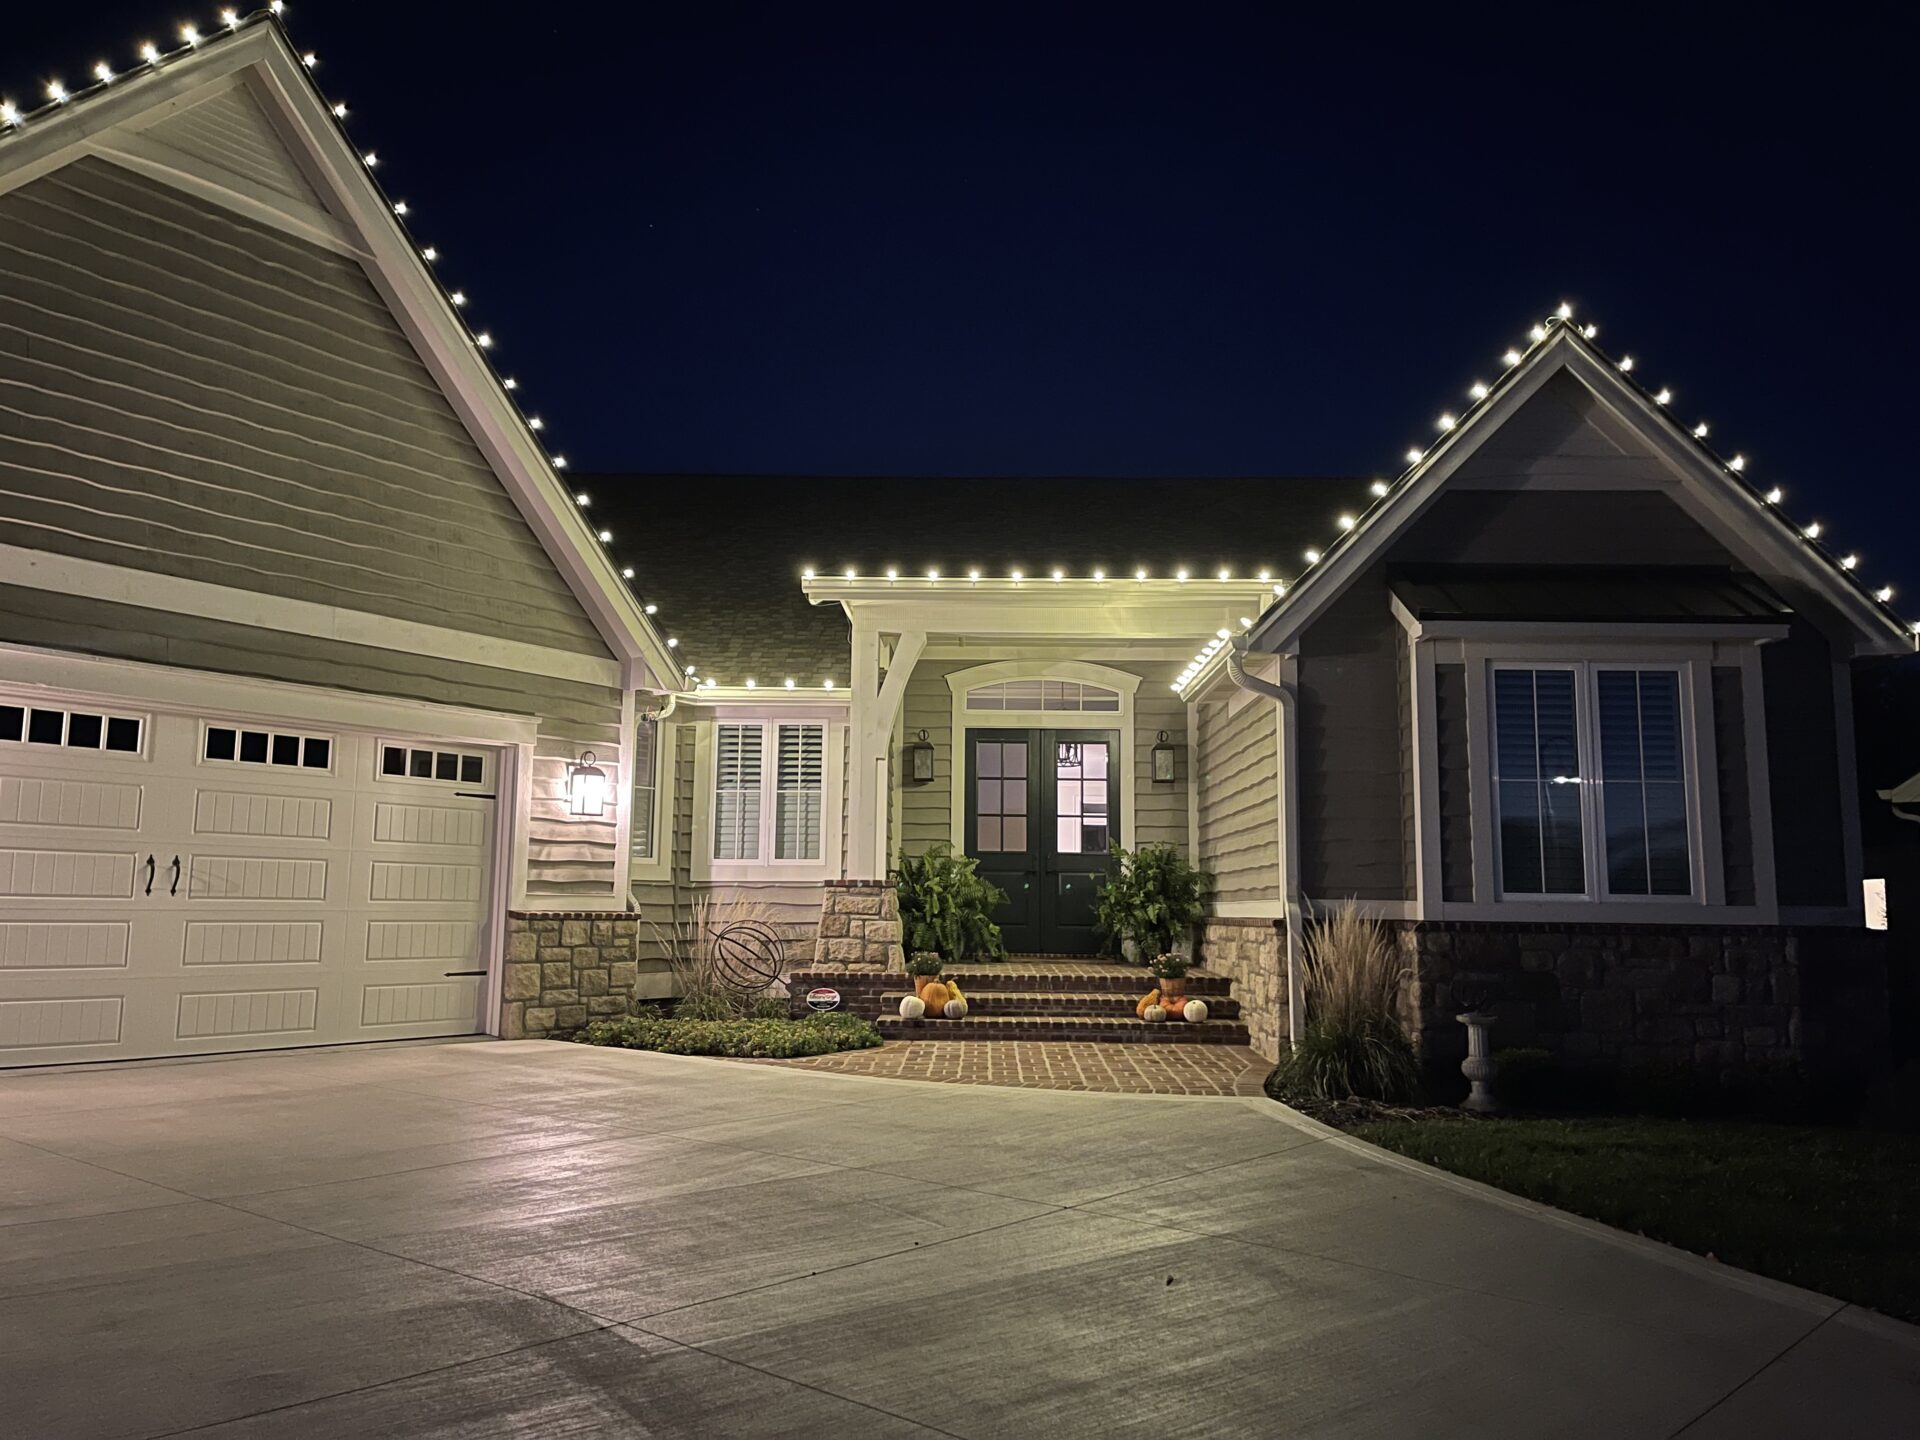 Residential Holiday Lighting Service - Squeegee Squad - Branson MO